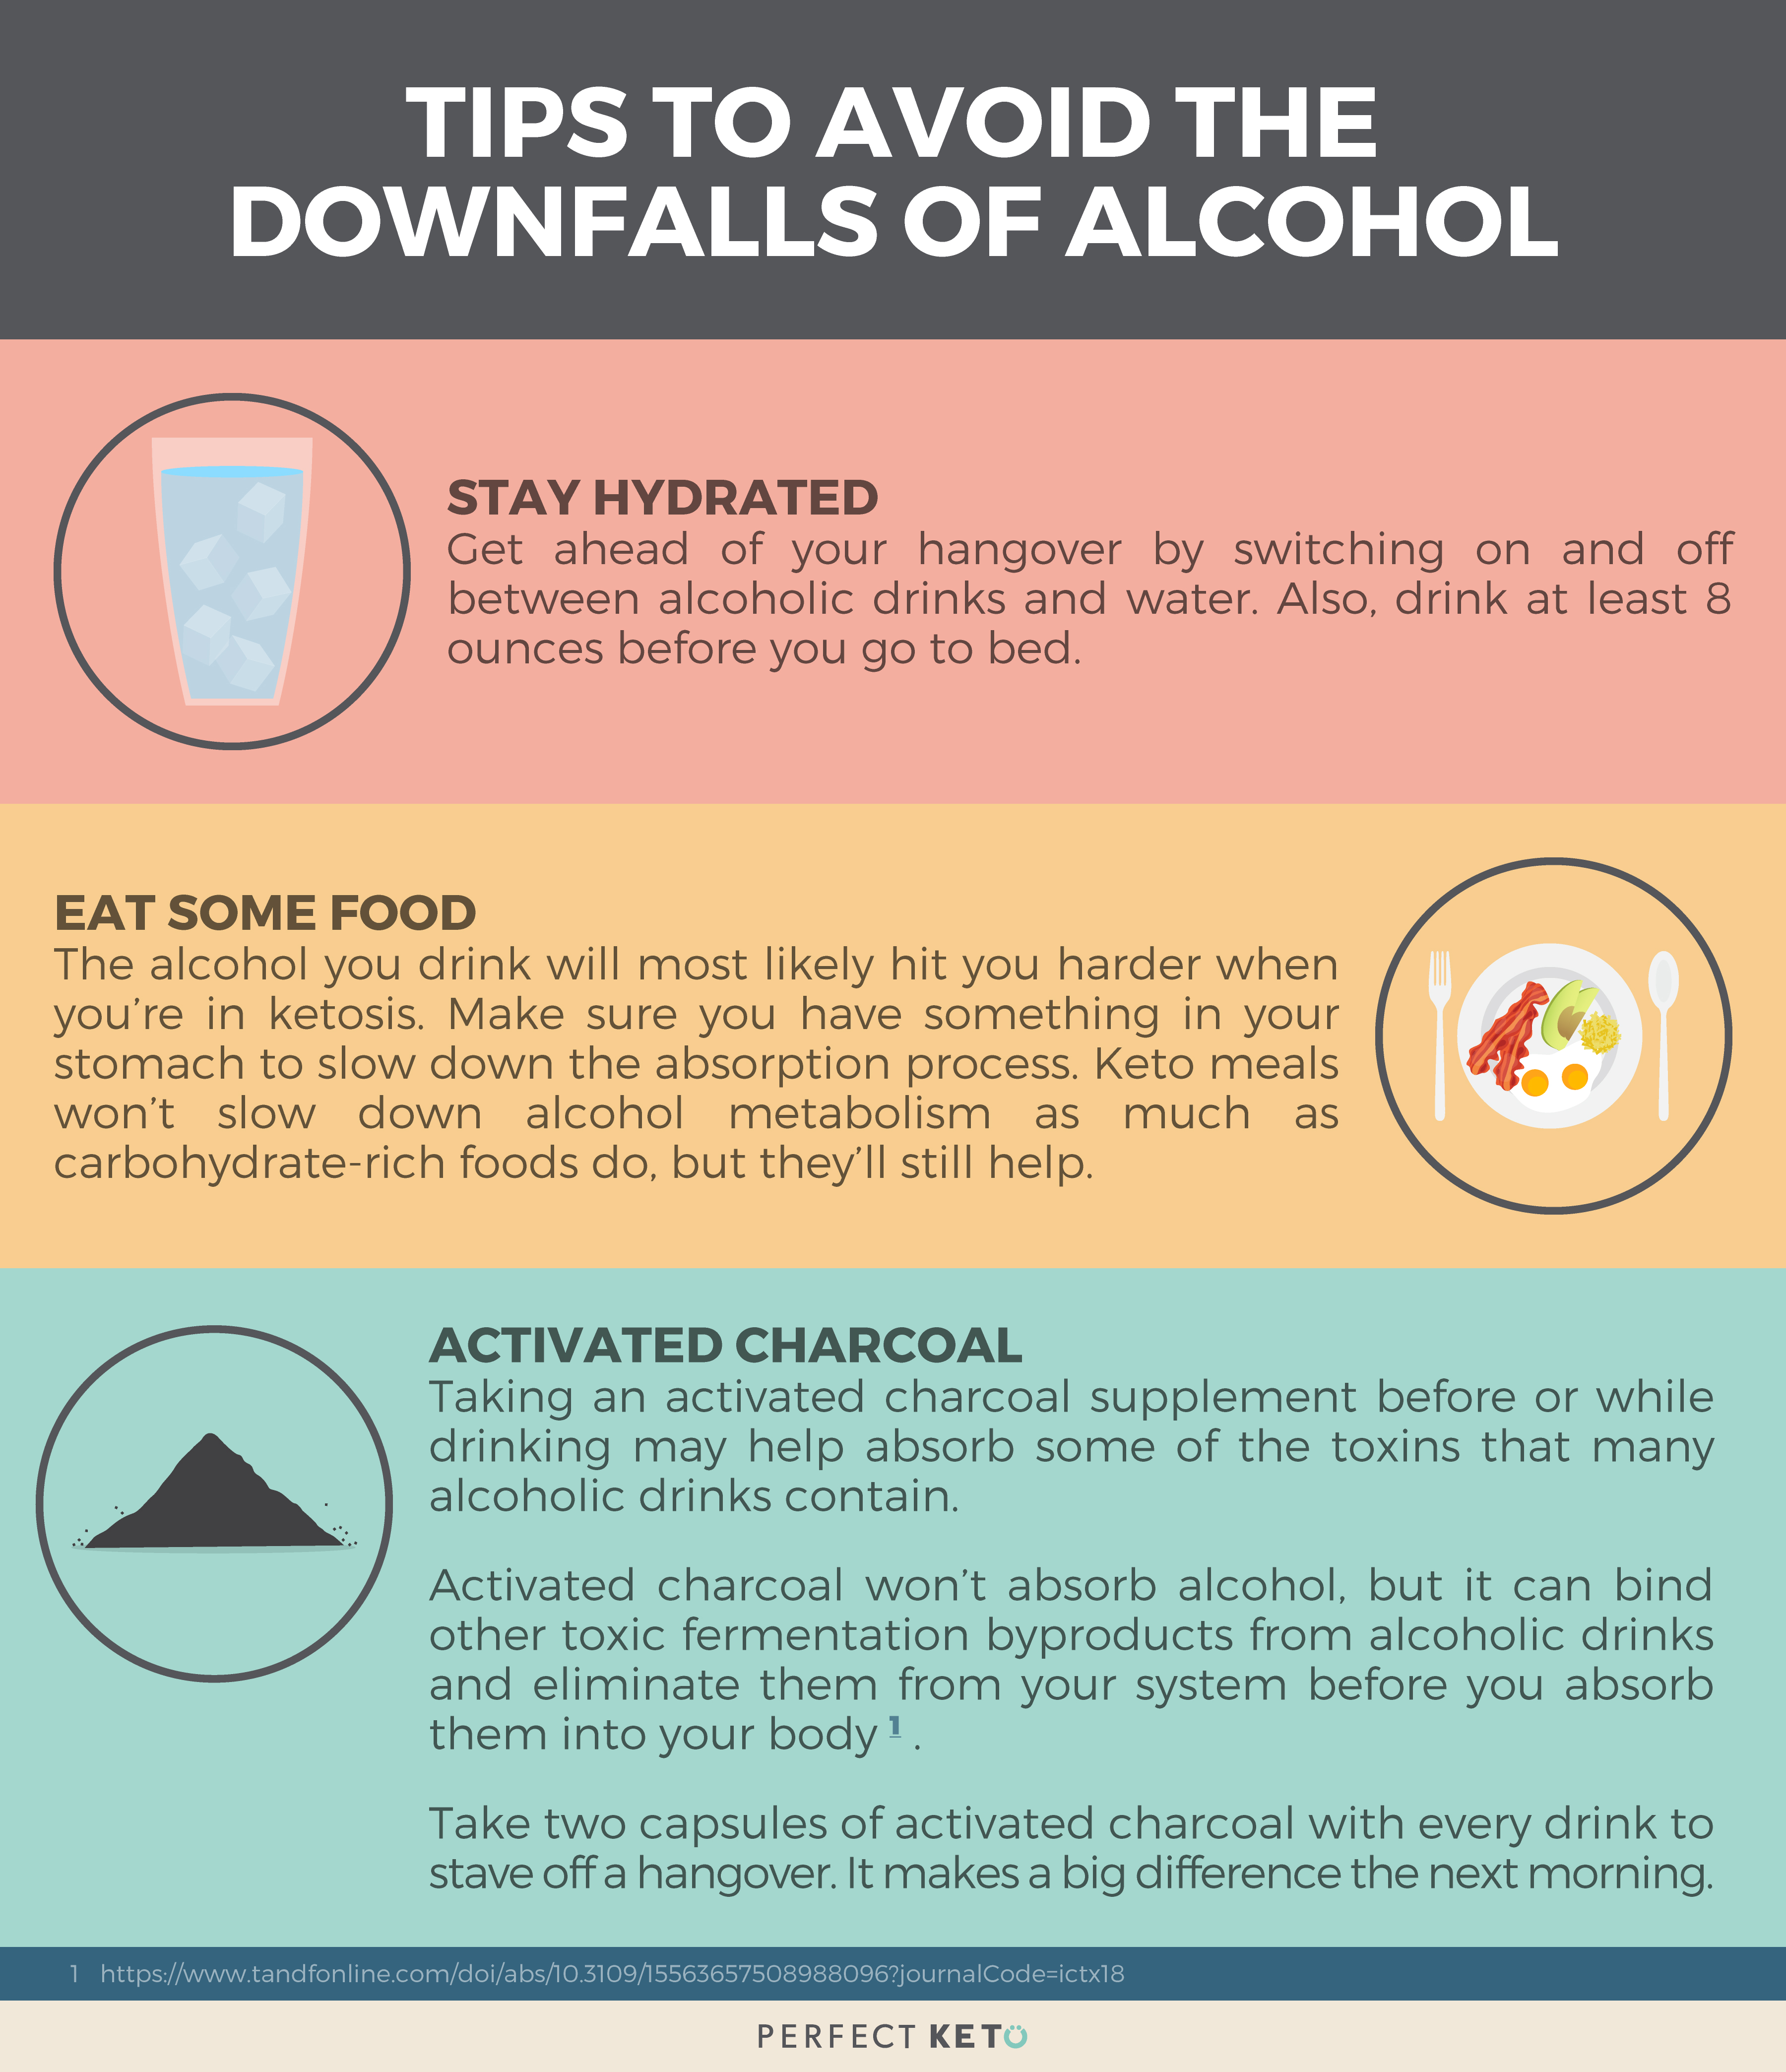 tips-to-avoid-the-downfalls-of-alcohol.jpg